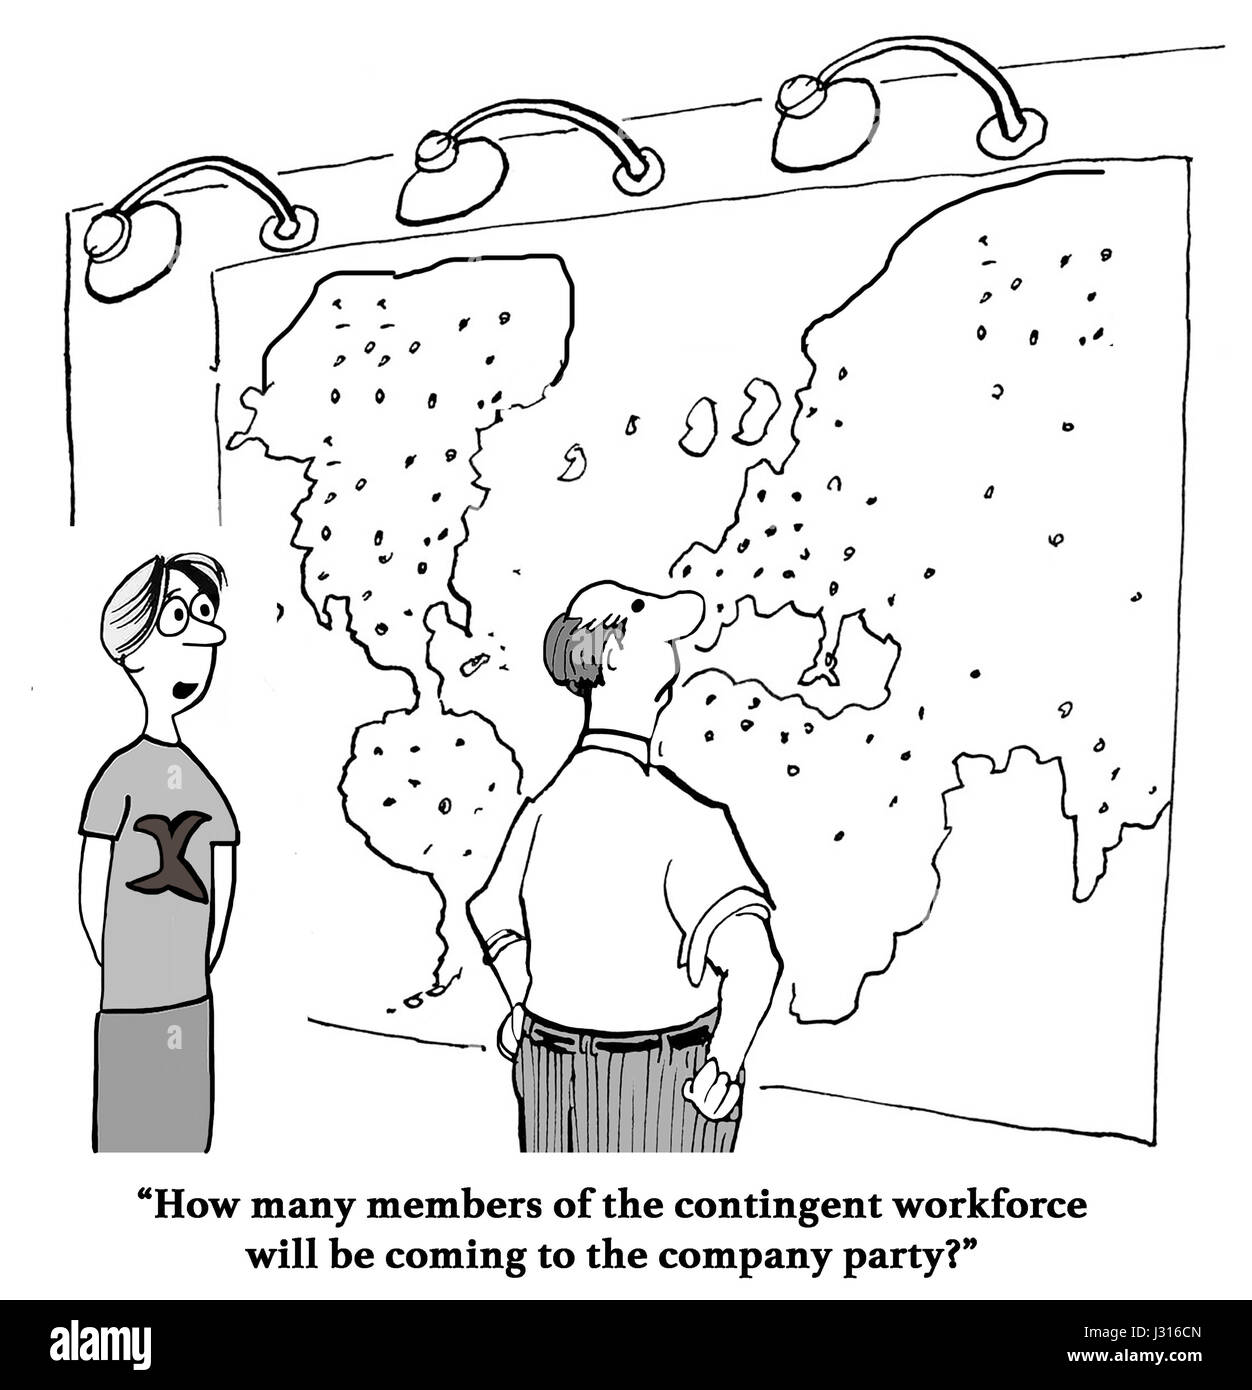 Business cartoon about a worldwide contingent workforce. Stock Photo